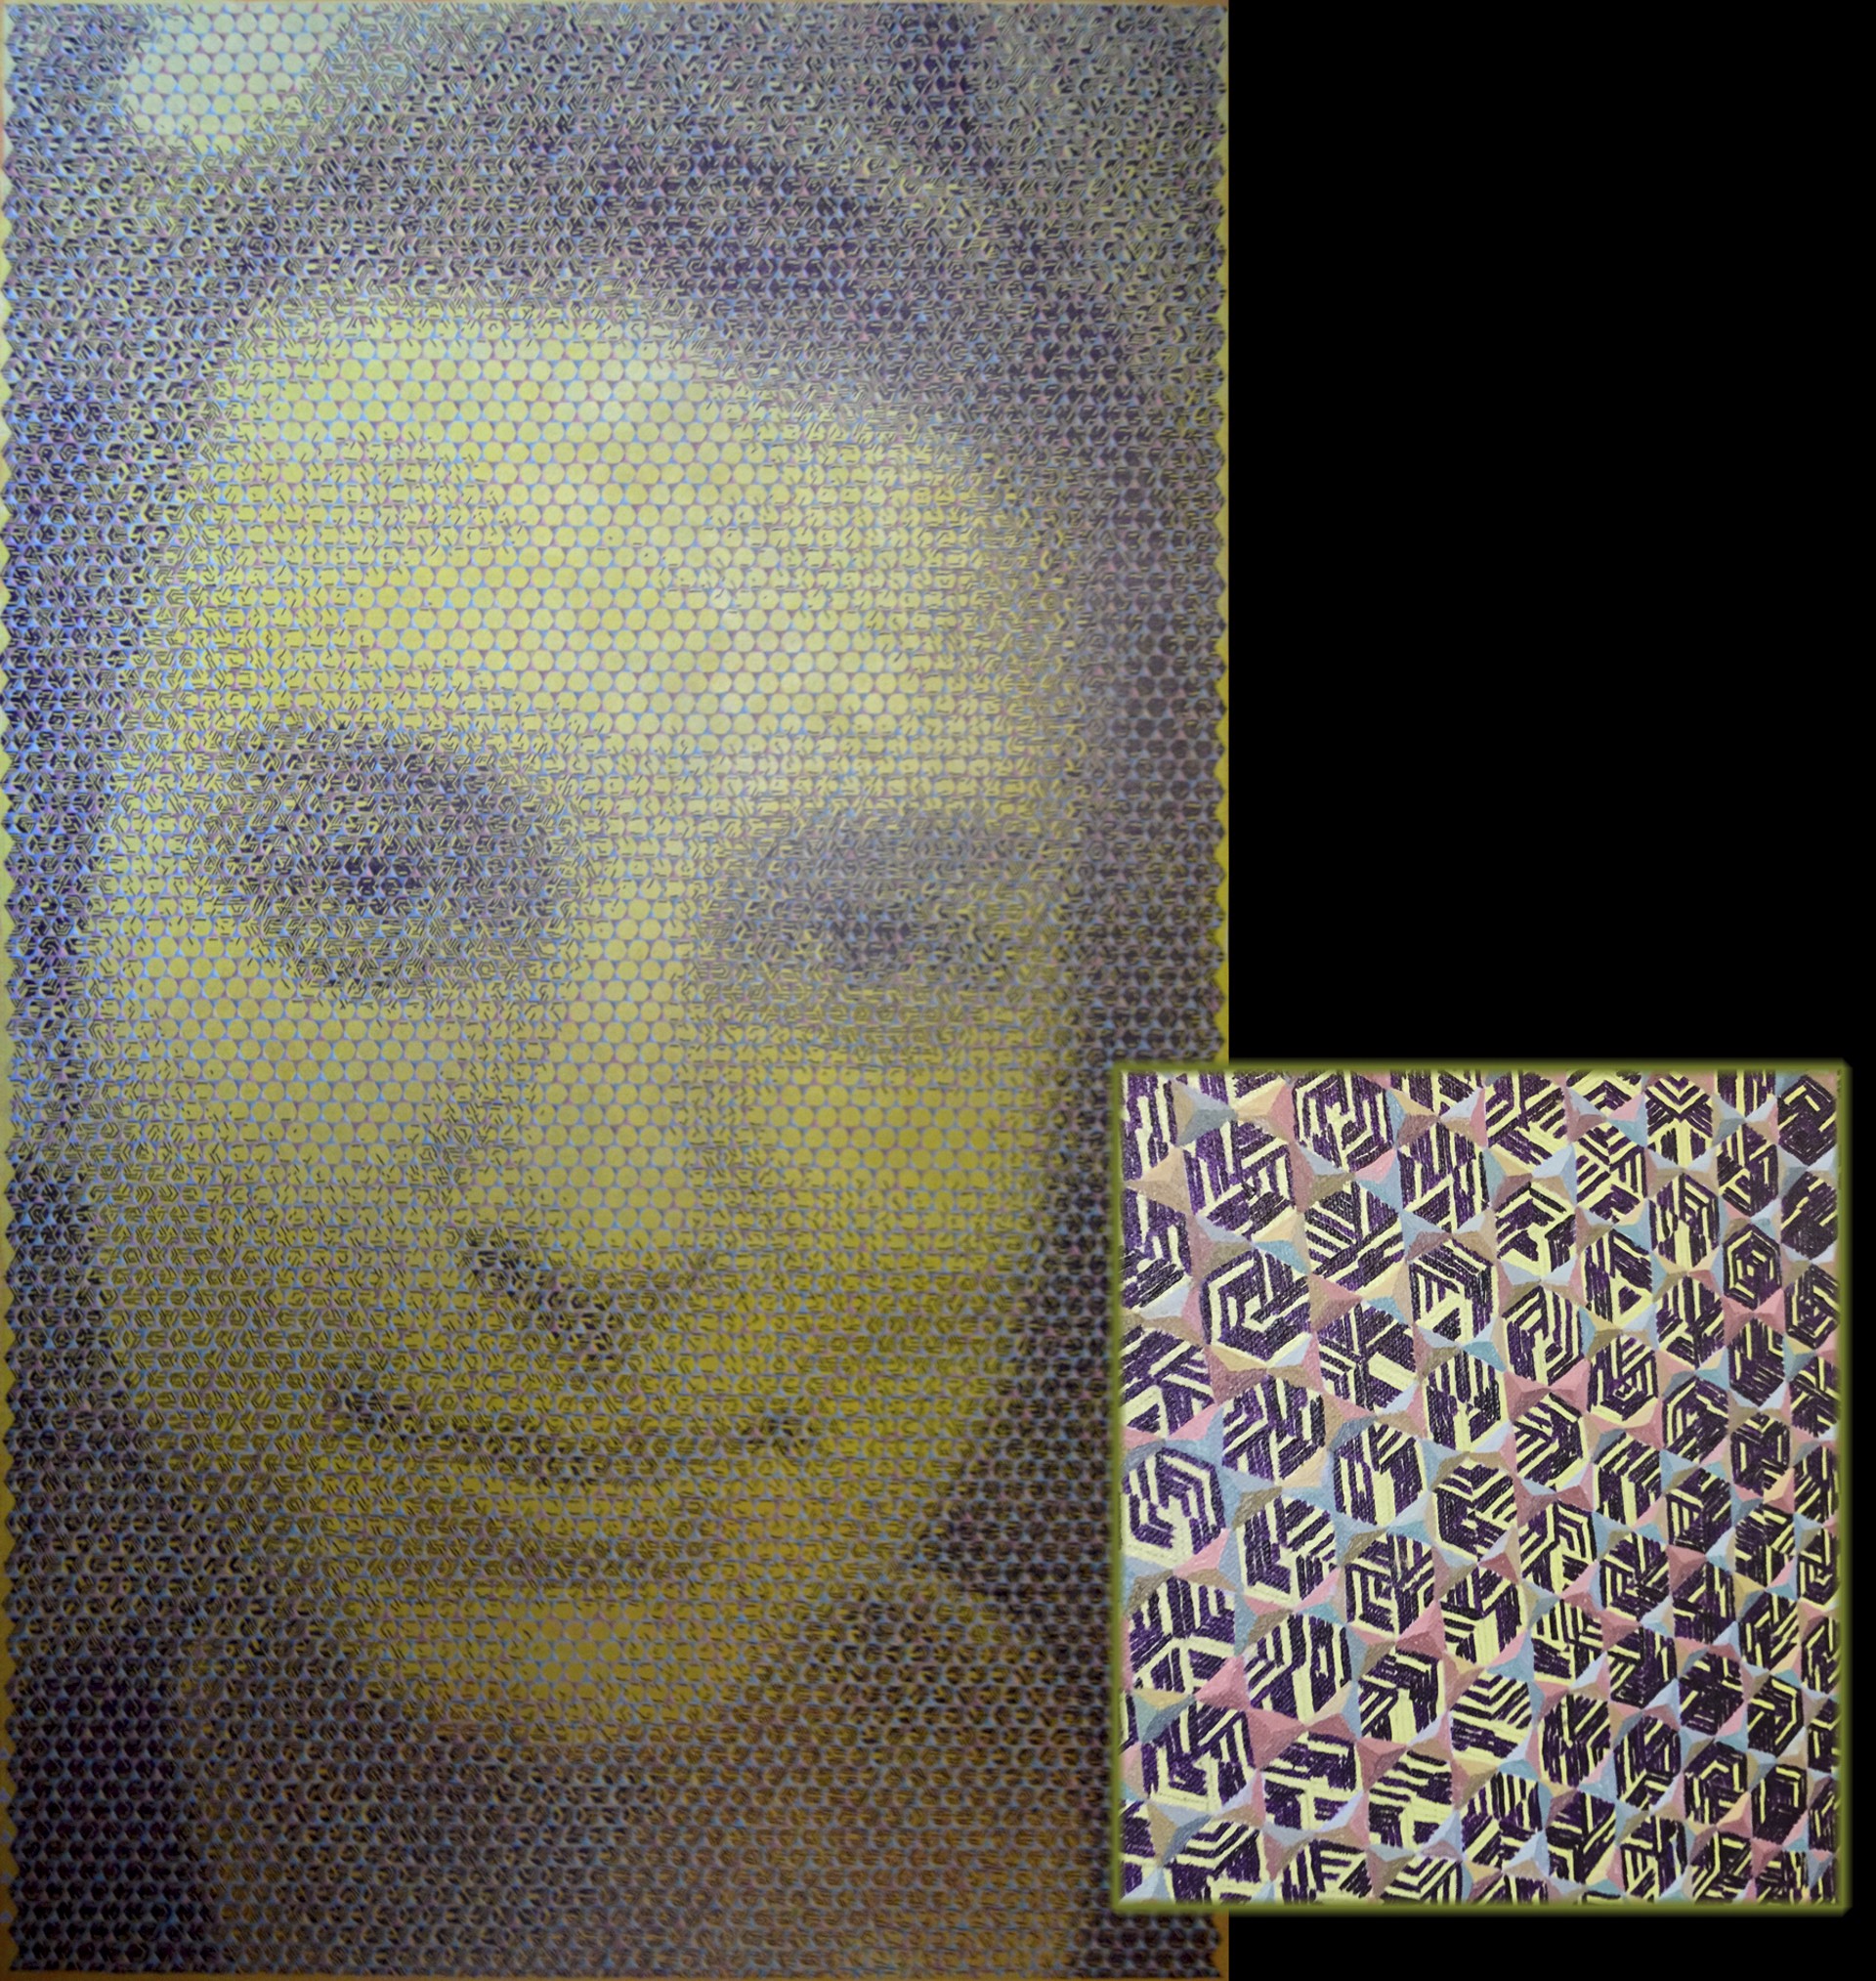 (A Portrait of Kathryn)(An Artist Statement)(A Proposal for a Collaborative Mural) 3 Alphabet base 14040 Pixelation by Lance Turner